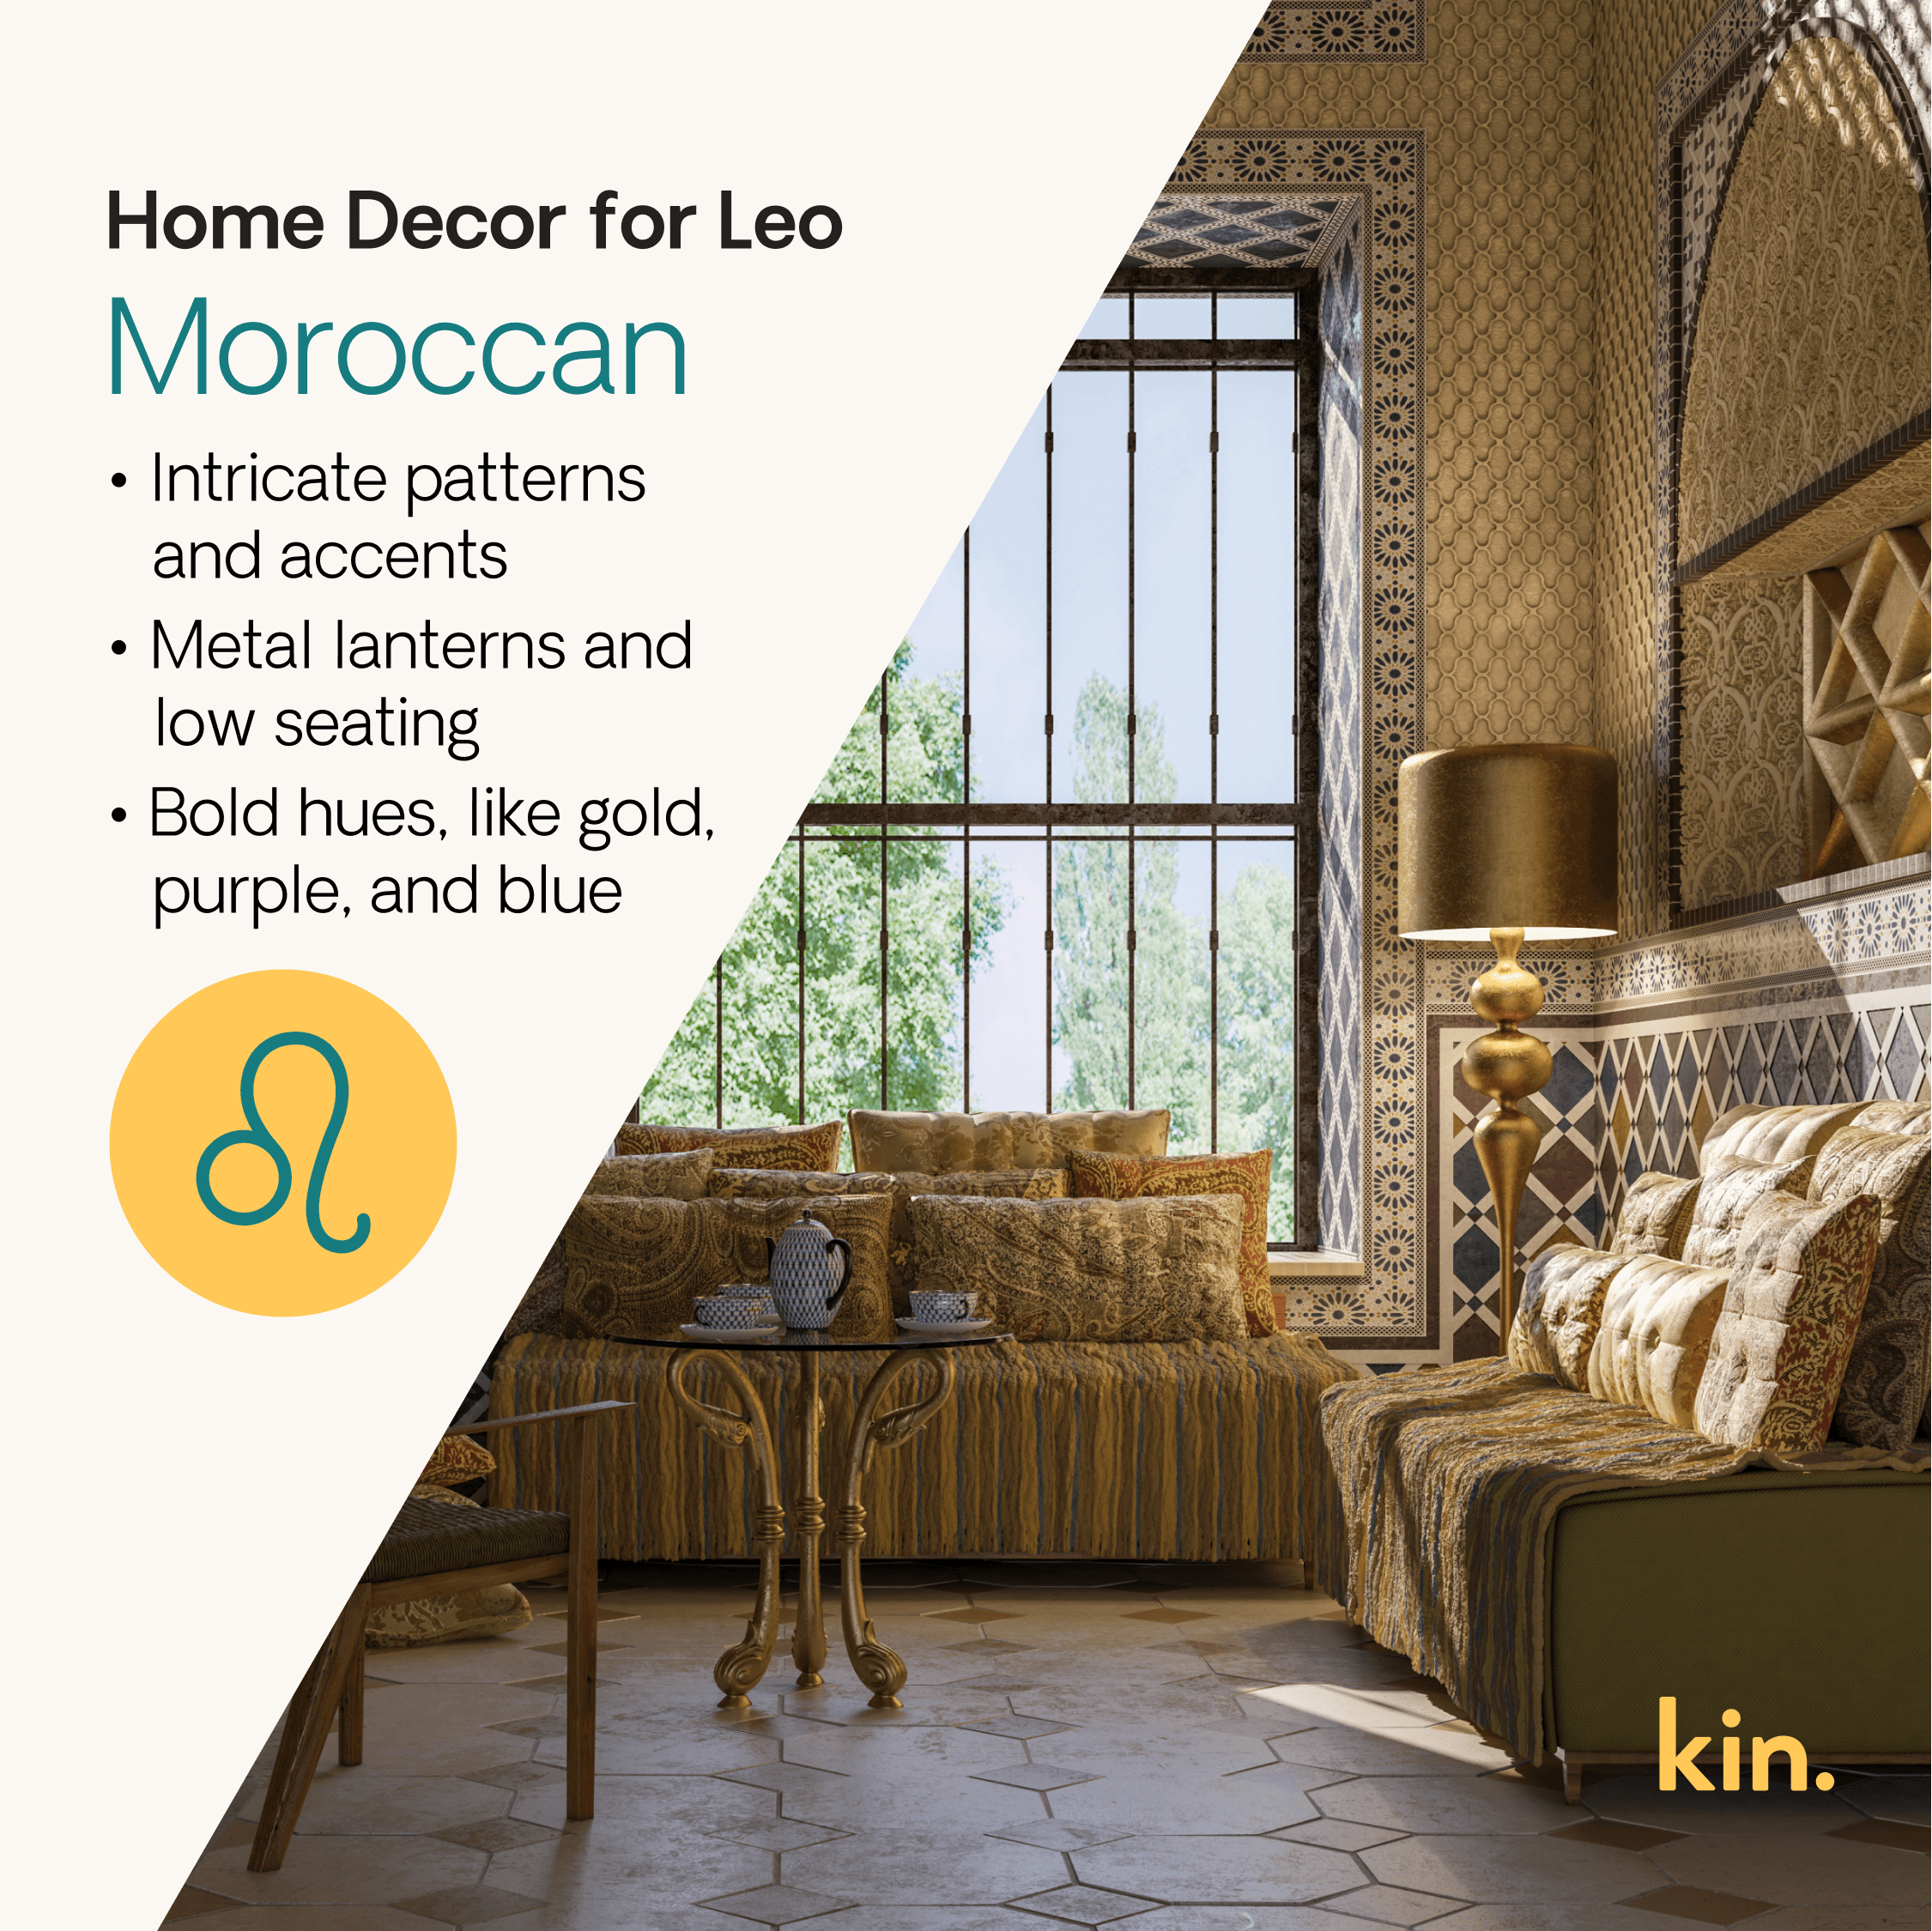 Home Decor for Leo: Moroccan Intricate patterns and accents Metal lanterns Bold hues